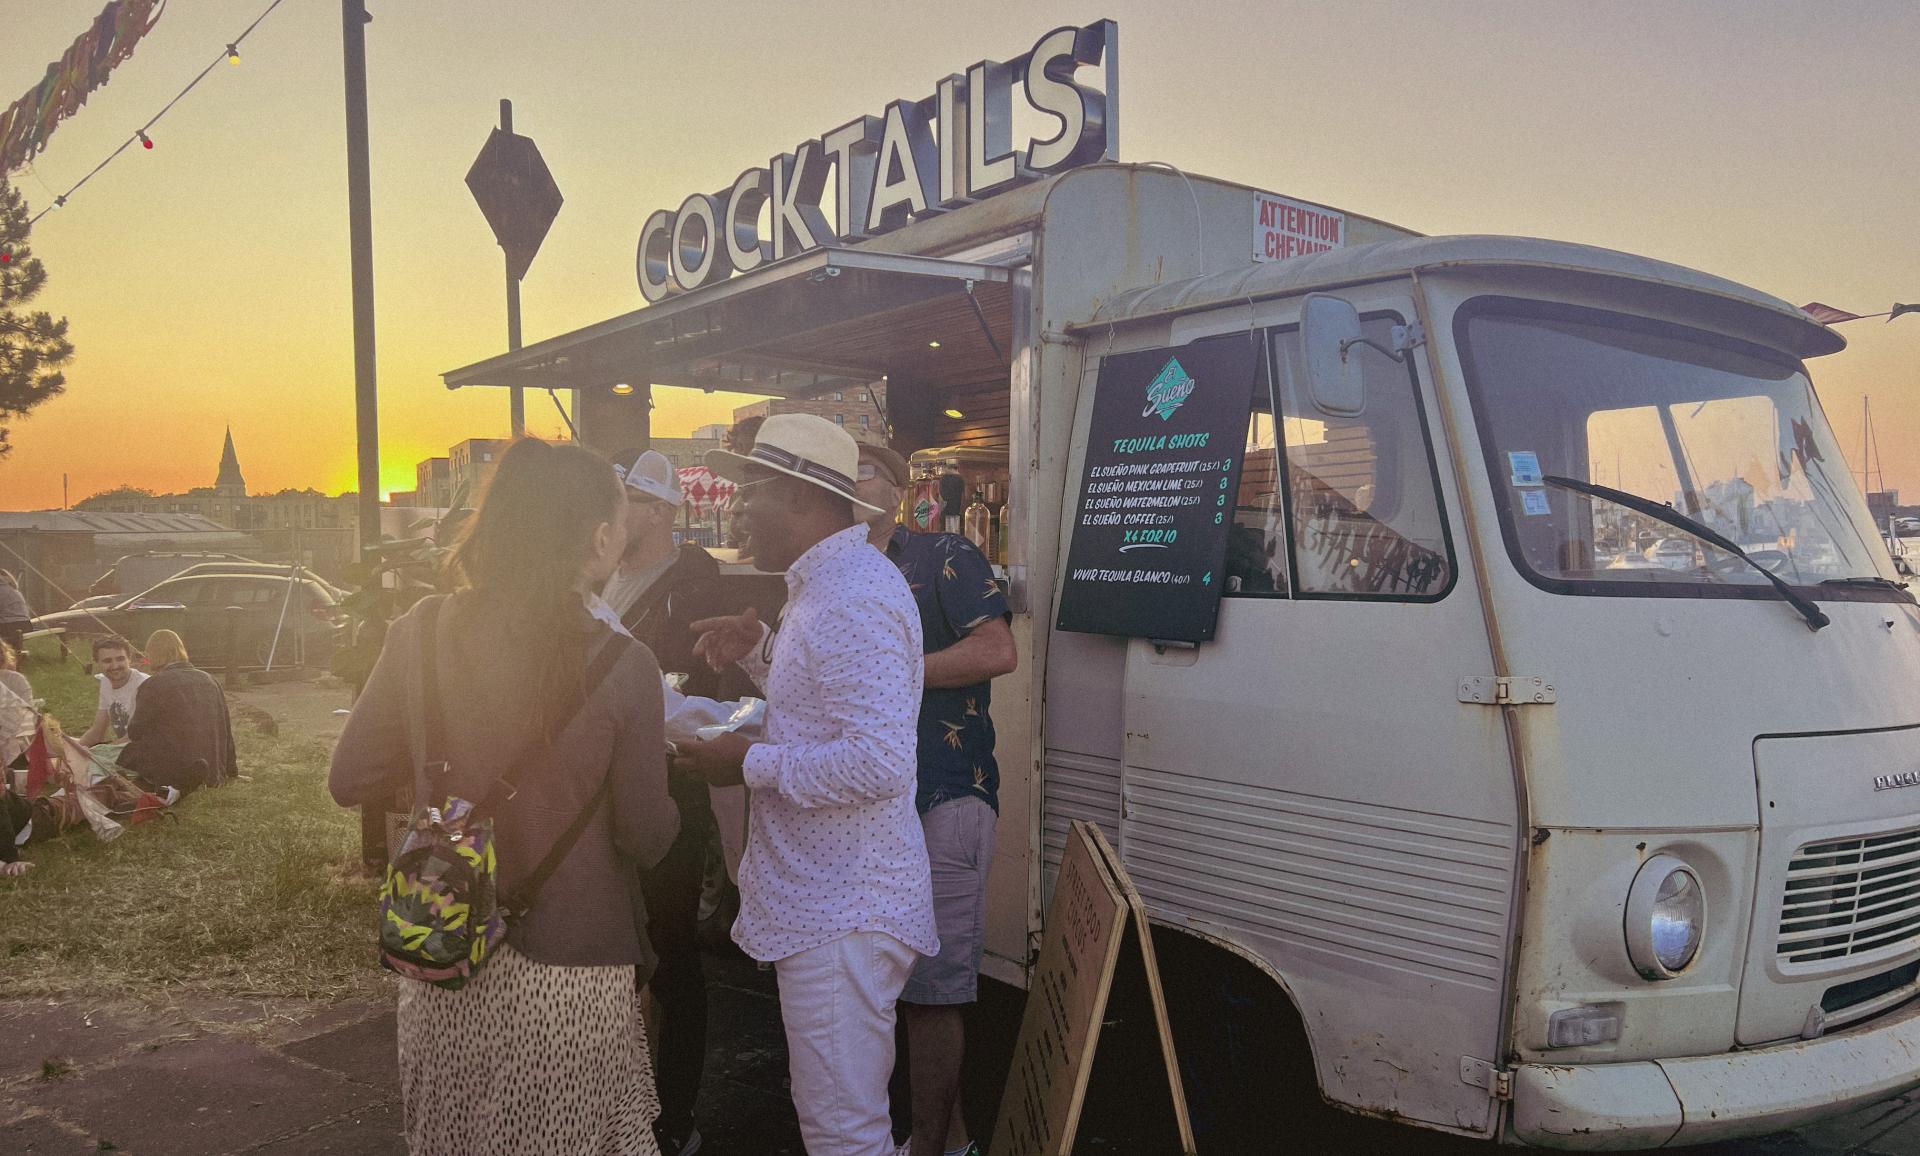 people stood in front of a cocktail vendor van